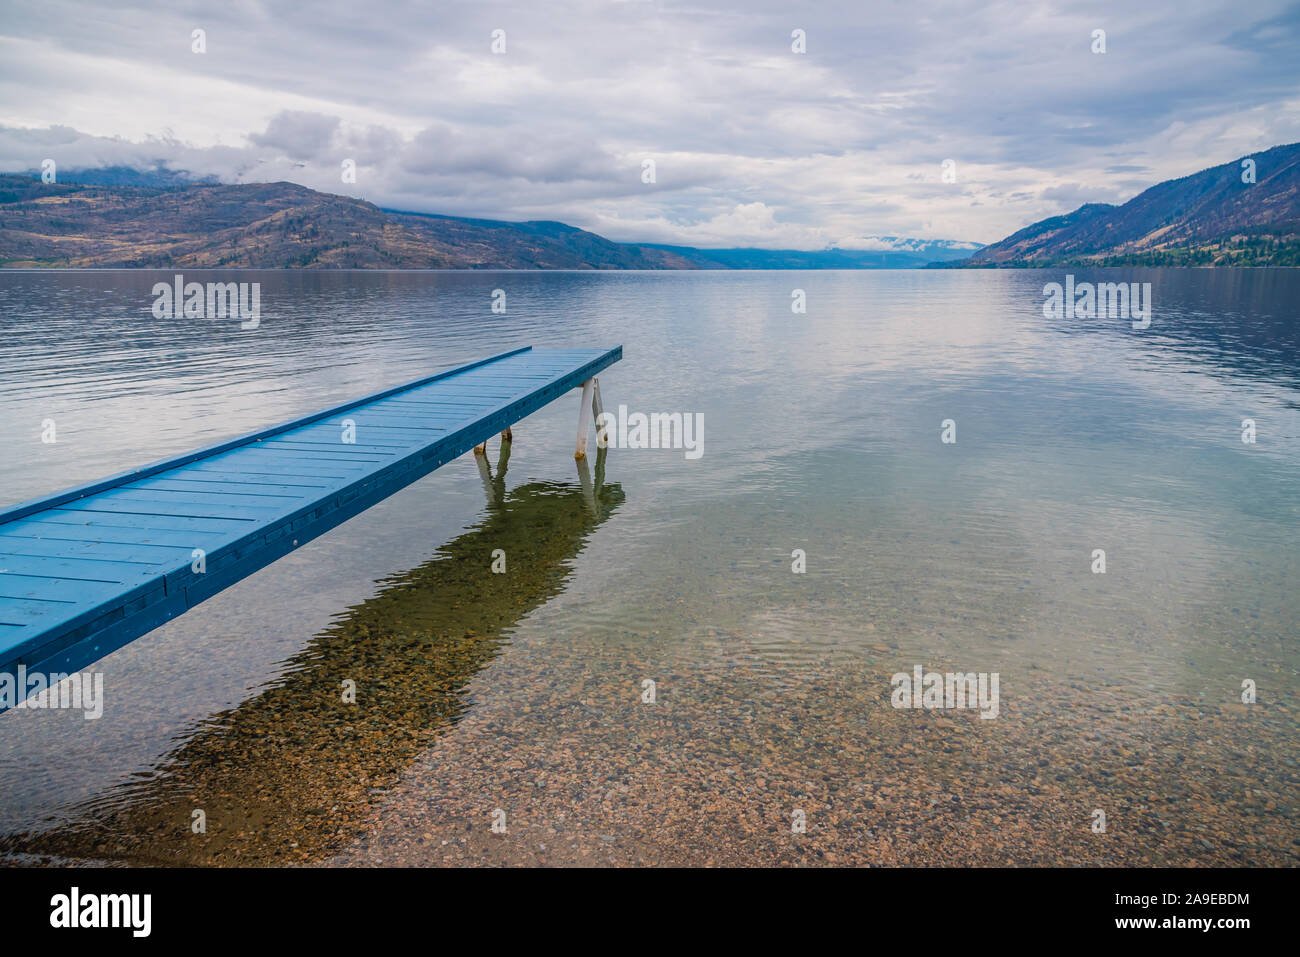 Blue painted dock extending over calm lake with view of overcast sky and mountains Stock Photo